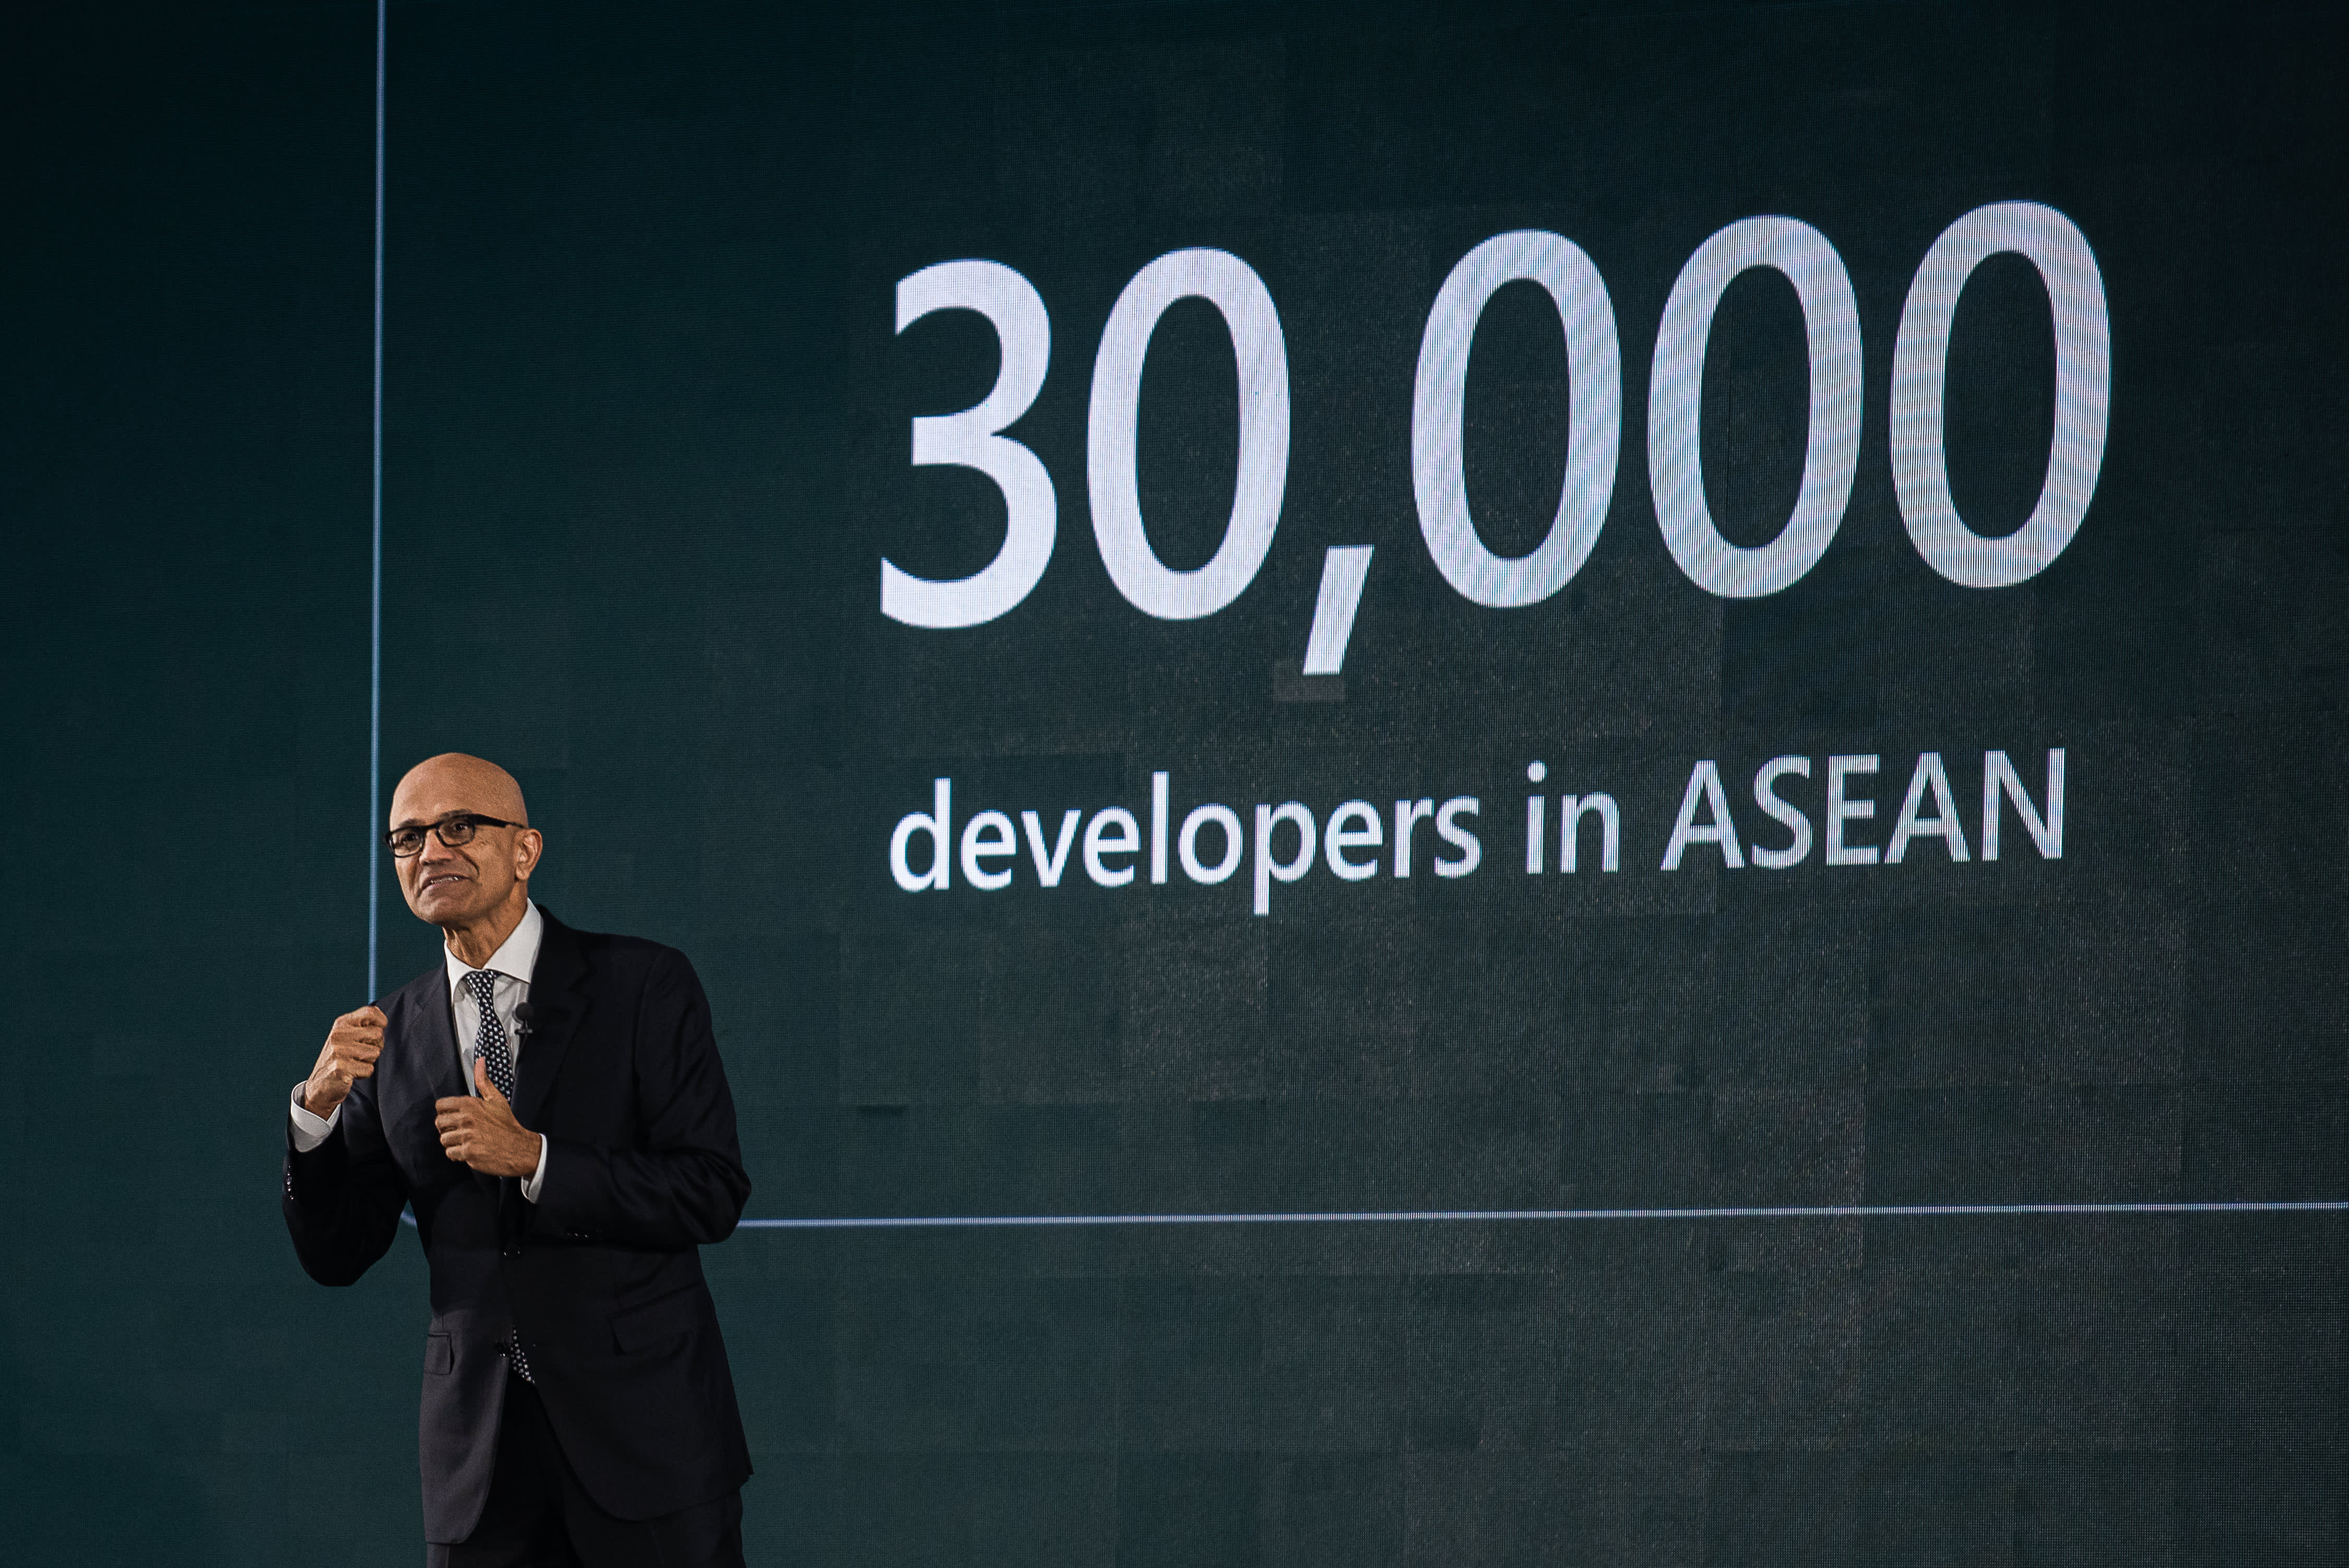 Microsoft opens data center in Thailand amid Southeast Asia expansion